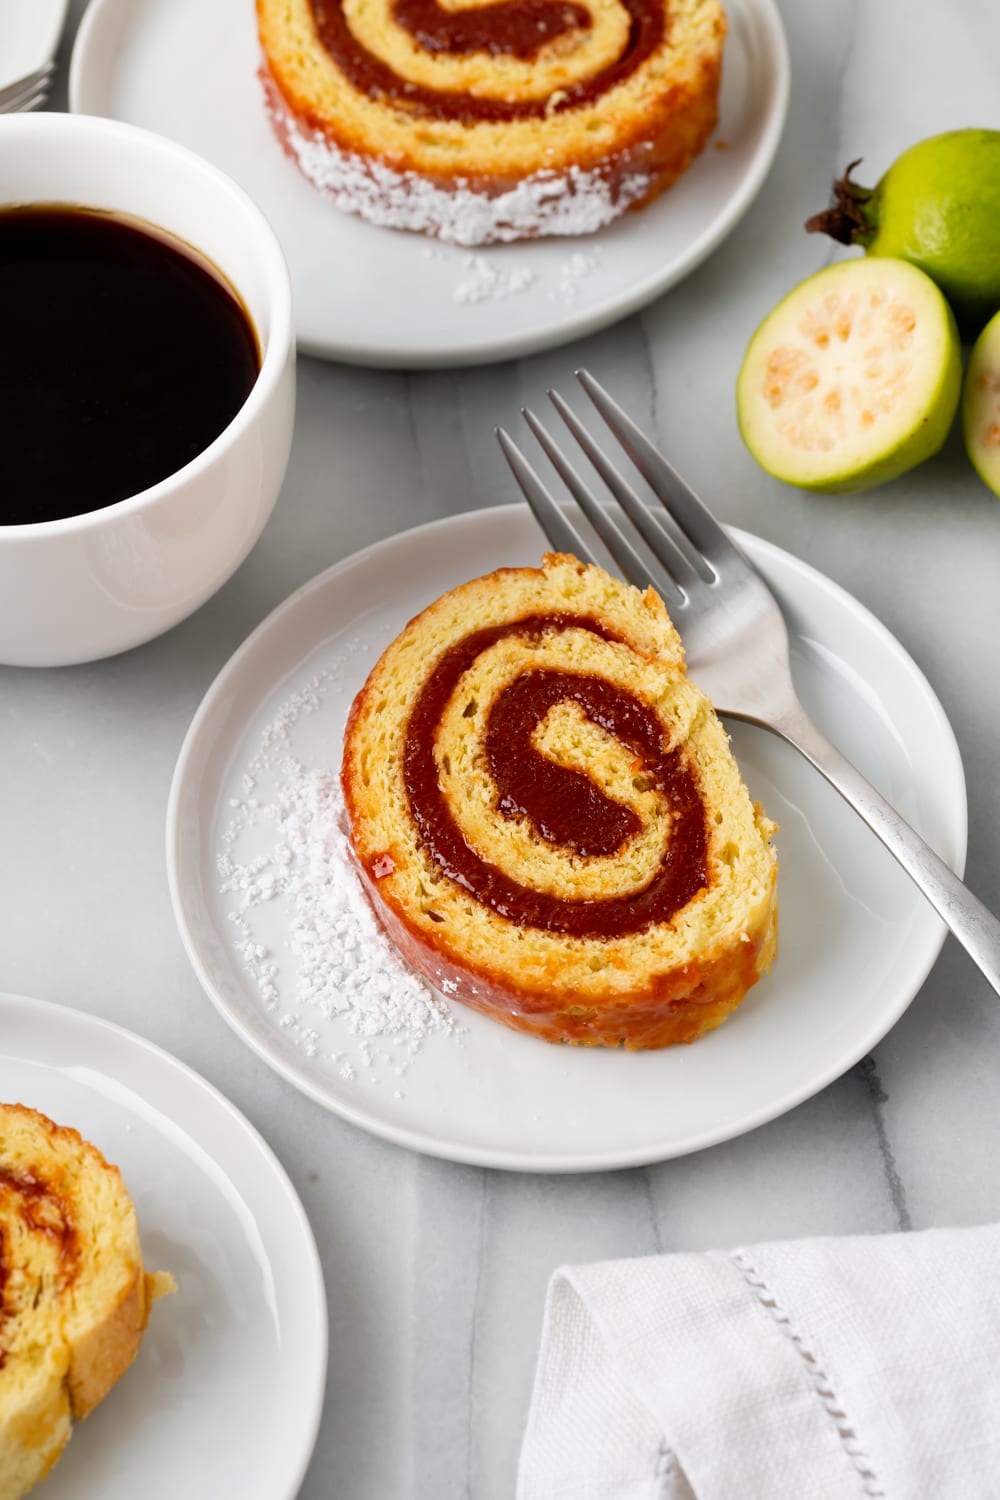 A piece of a guava swiss roll cake on a white plate with a fork on it with a white mug of coffee on the side